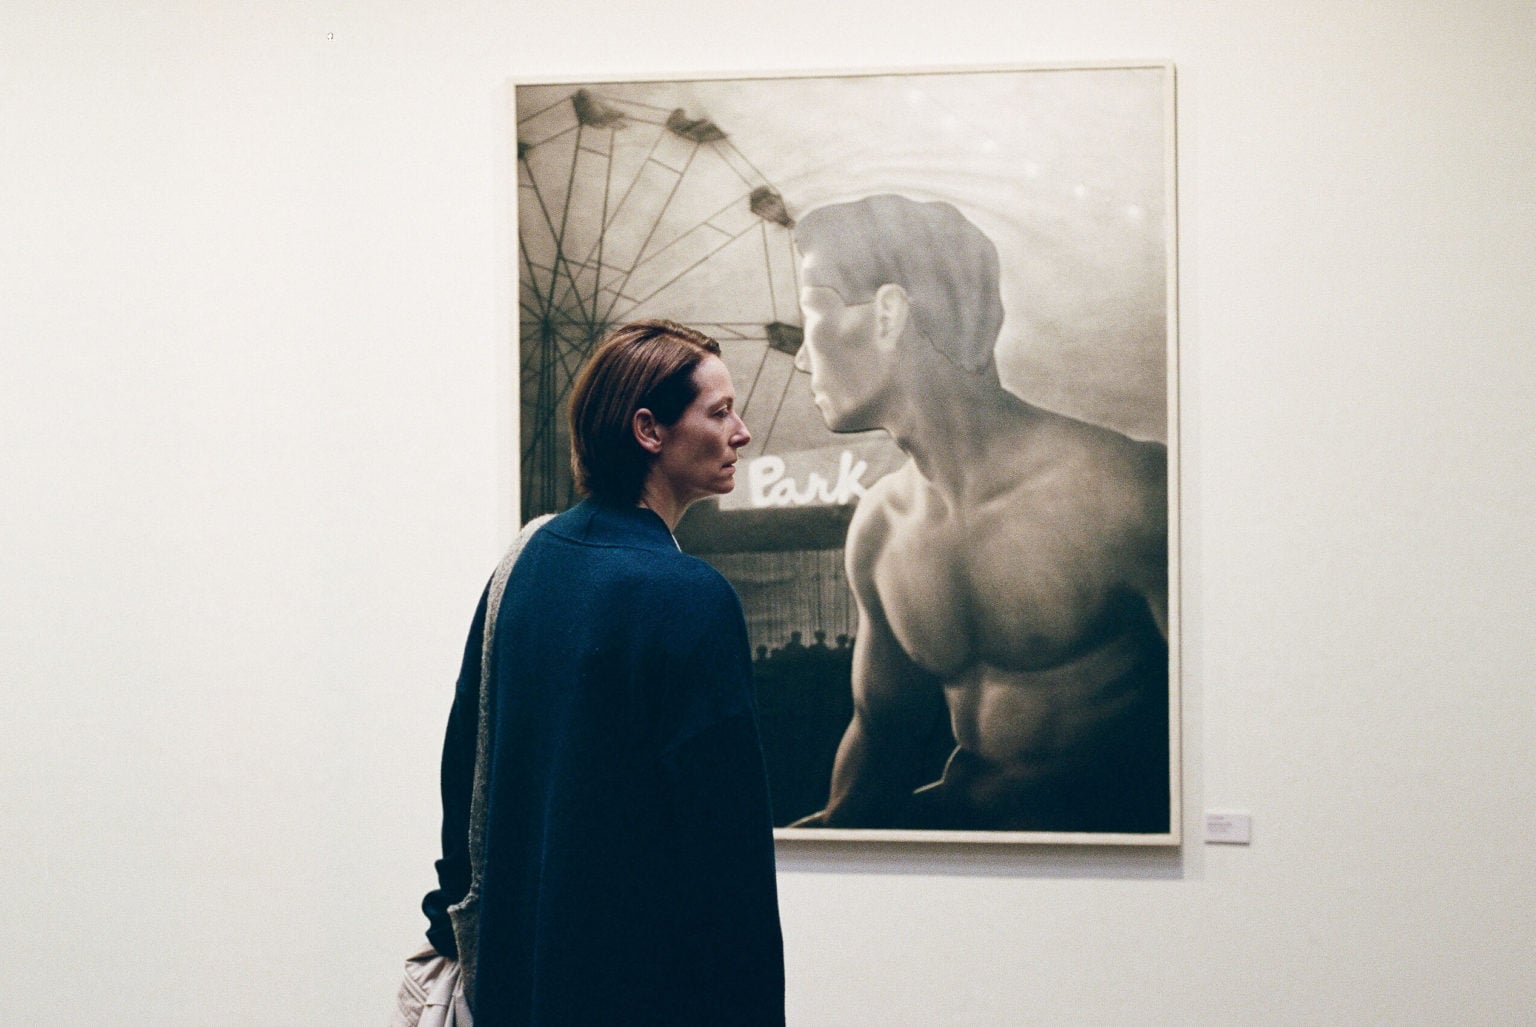 Jessica at an art gallery